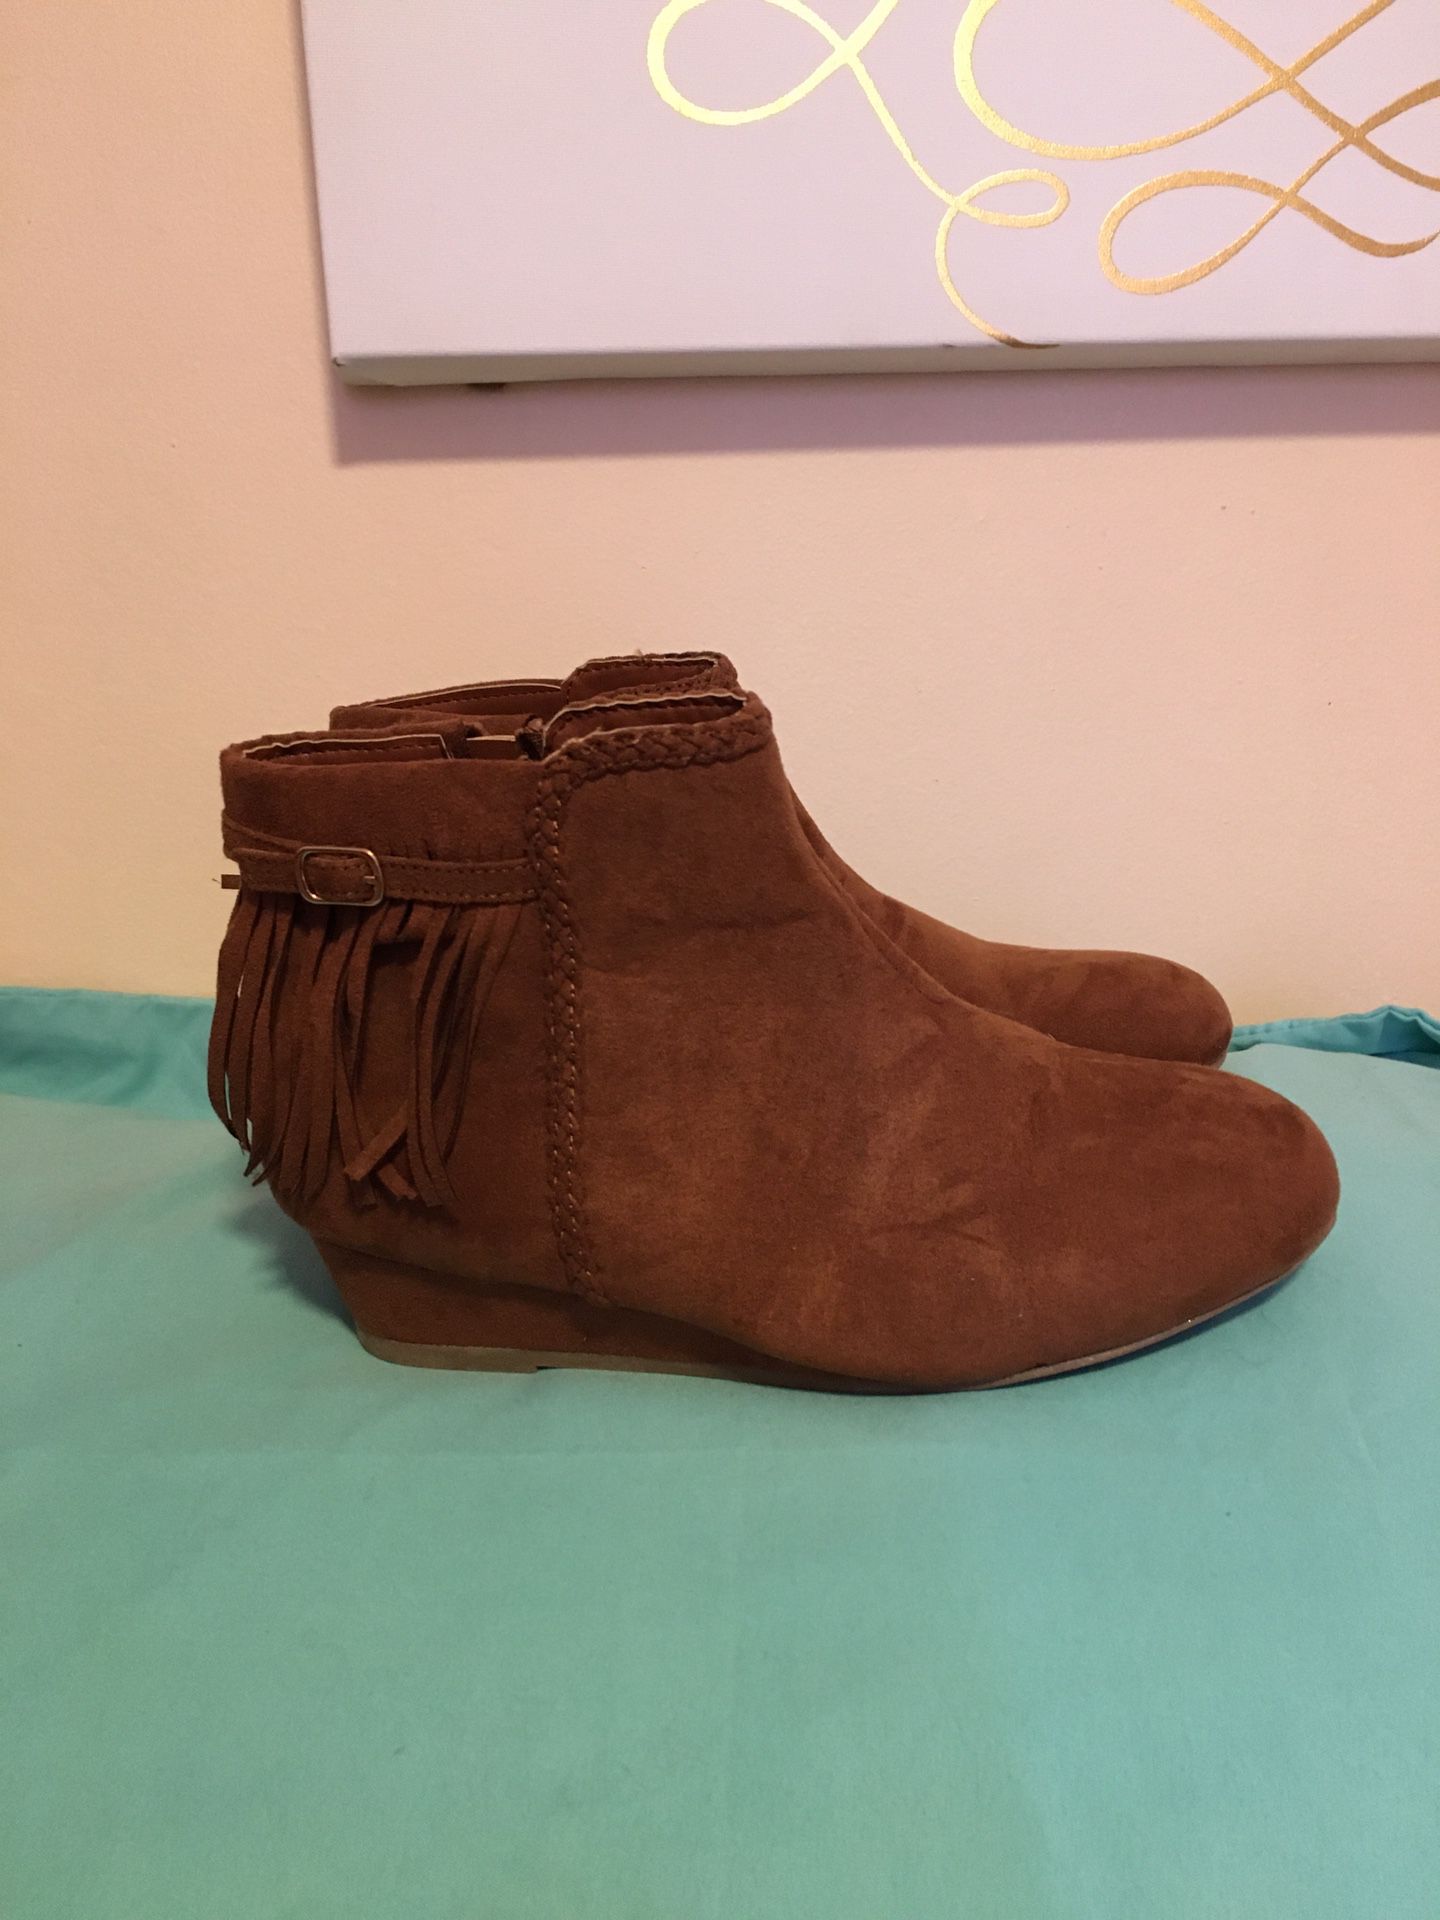 Boots girls size 3